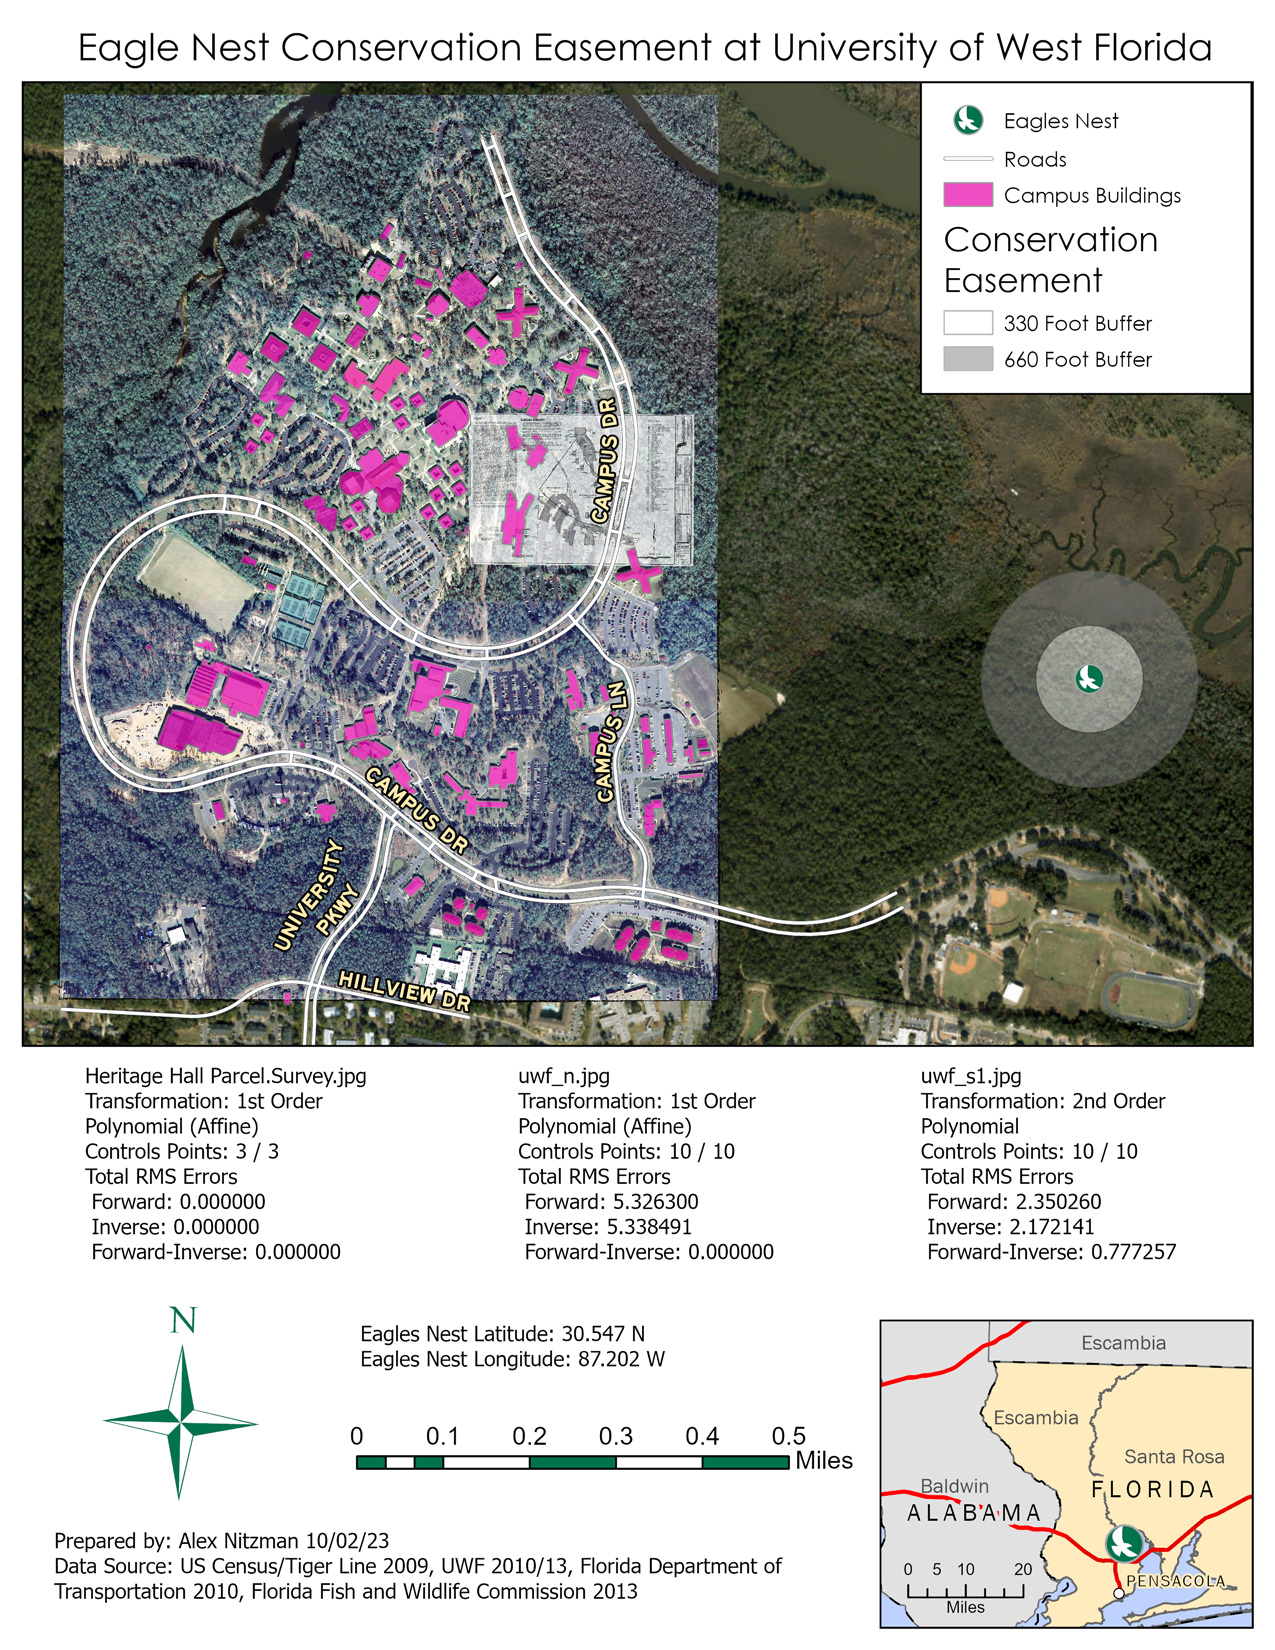 Aerial imagery and GIS data showing the UWF Campus and and Eagles nest easement